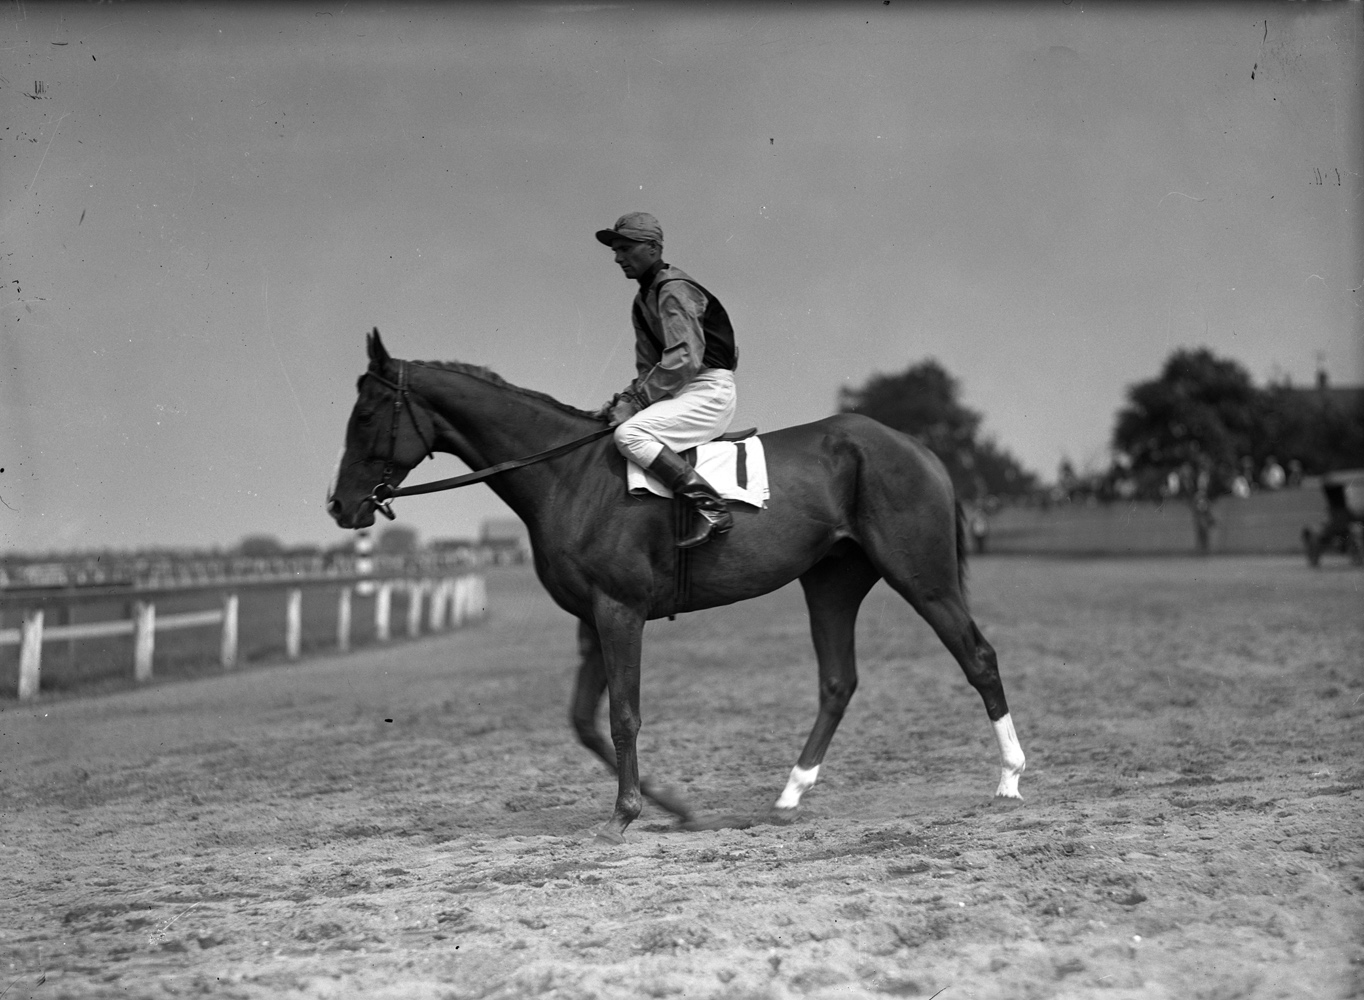 Sarazen with Earl Sande up (Keeneland Library Cook Collection)